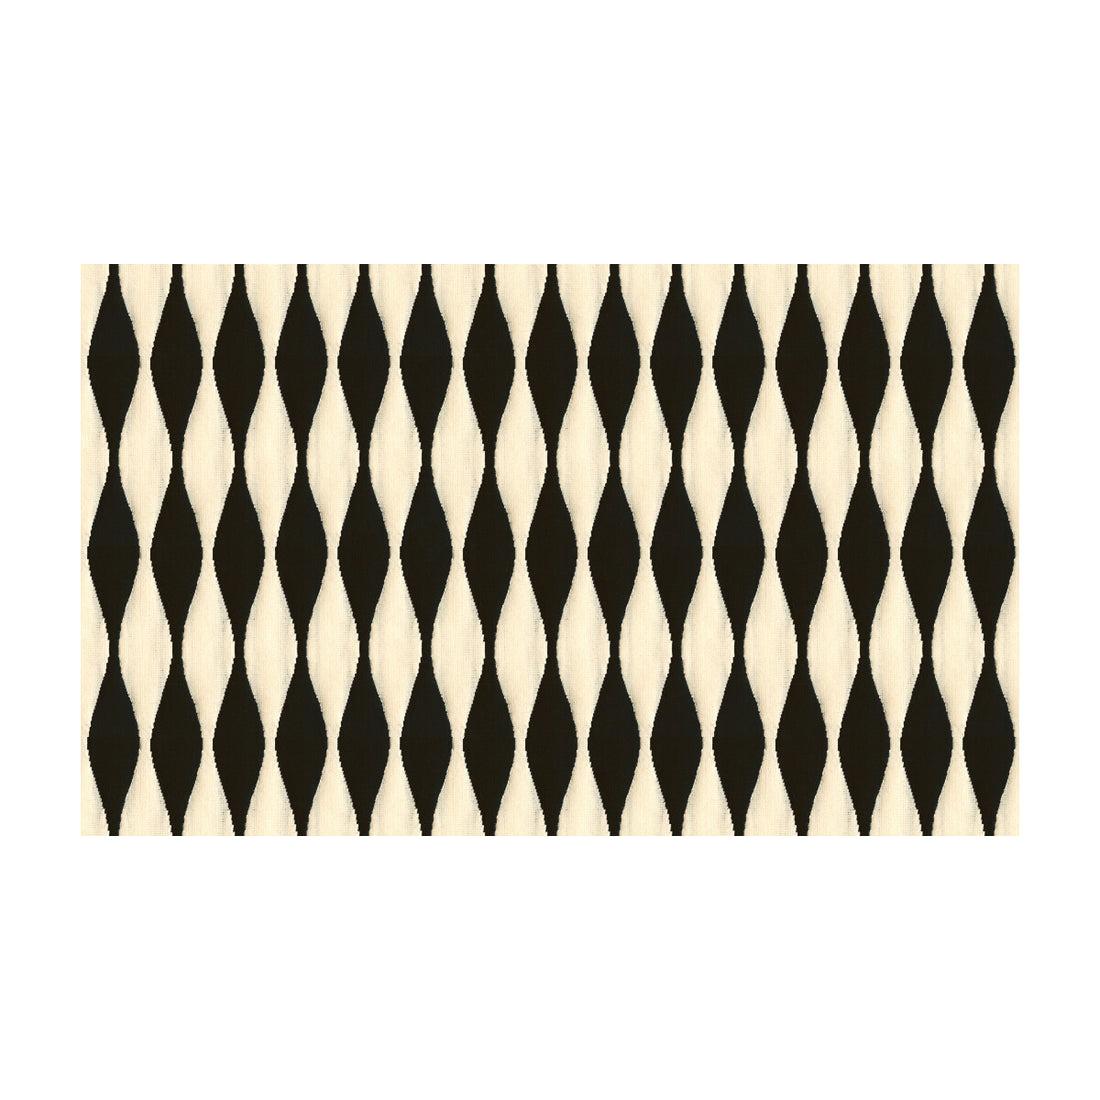 Baza fabric in licorice color - pattern 33658.81.0 - by Kravet Design in the Jonathan Adler Performance Fabrics collection